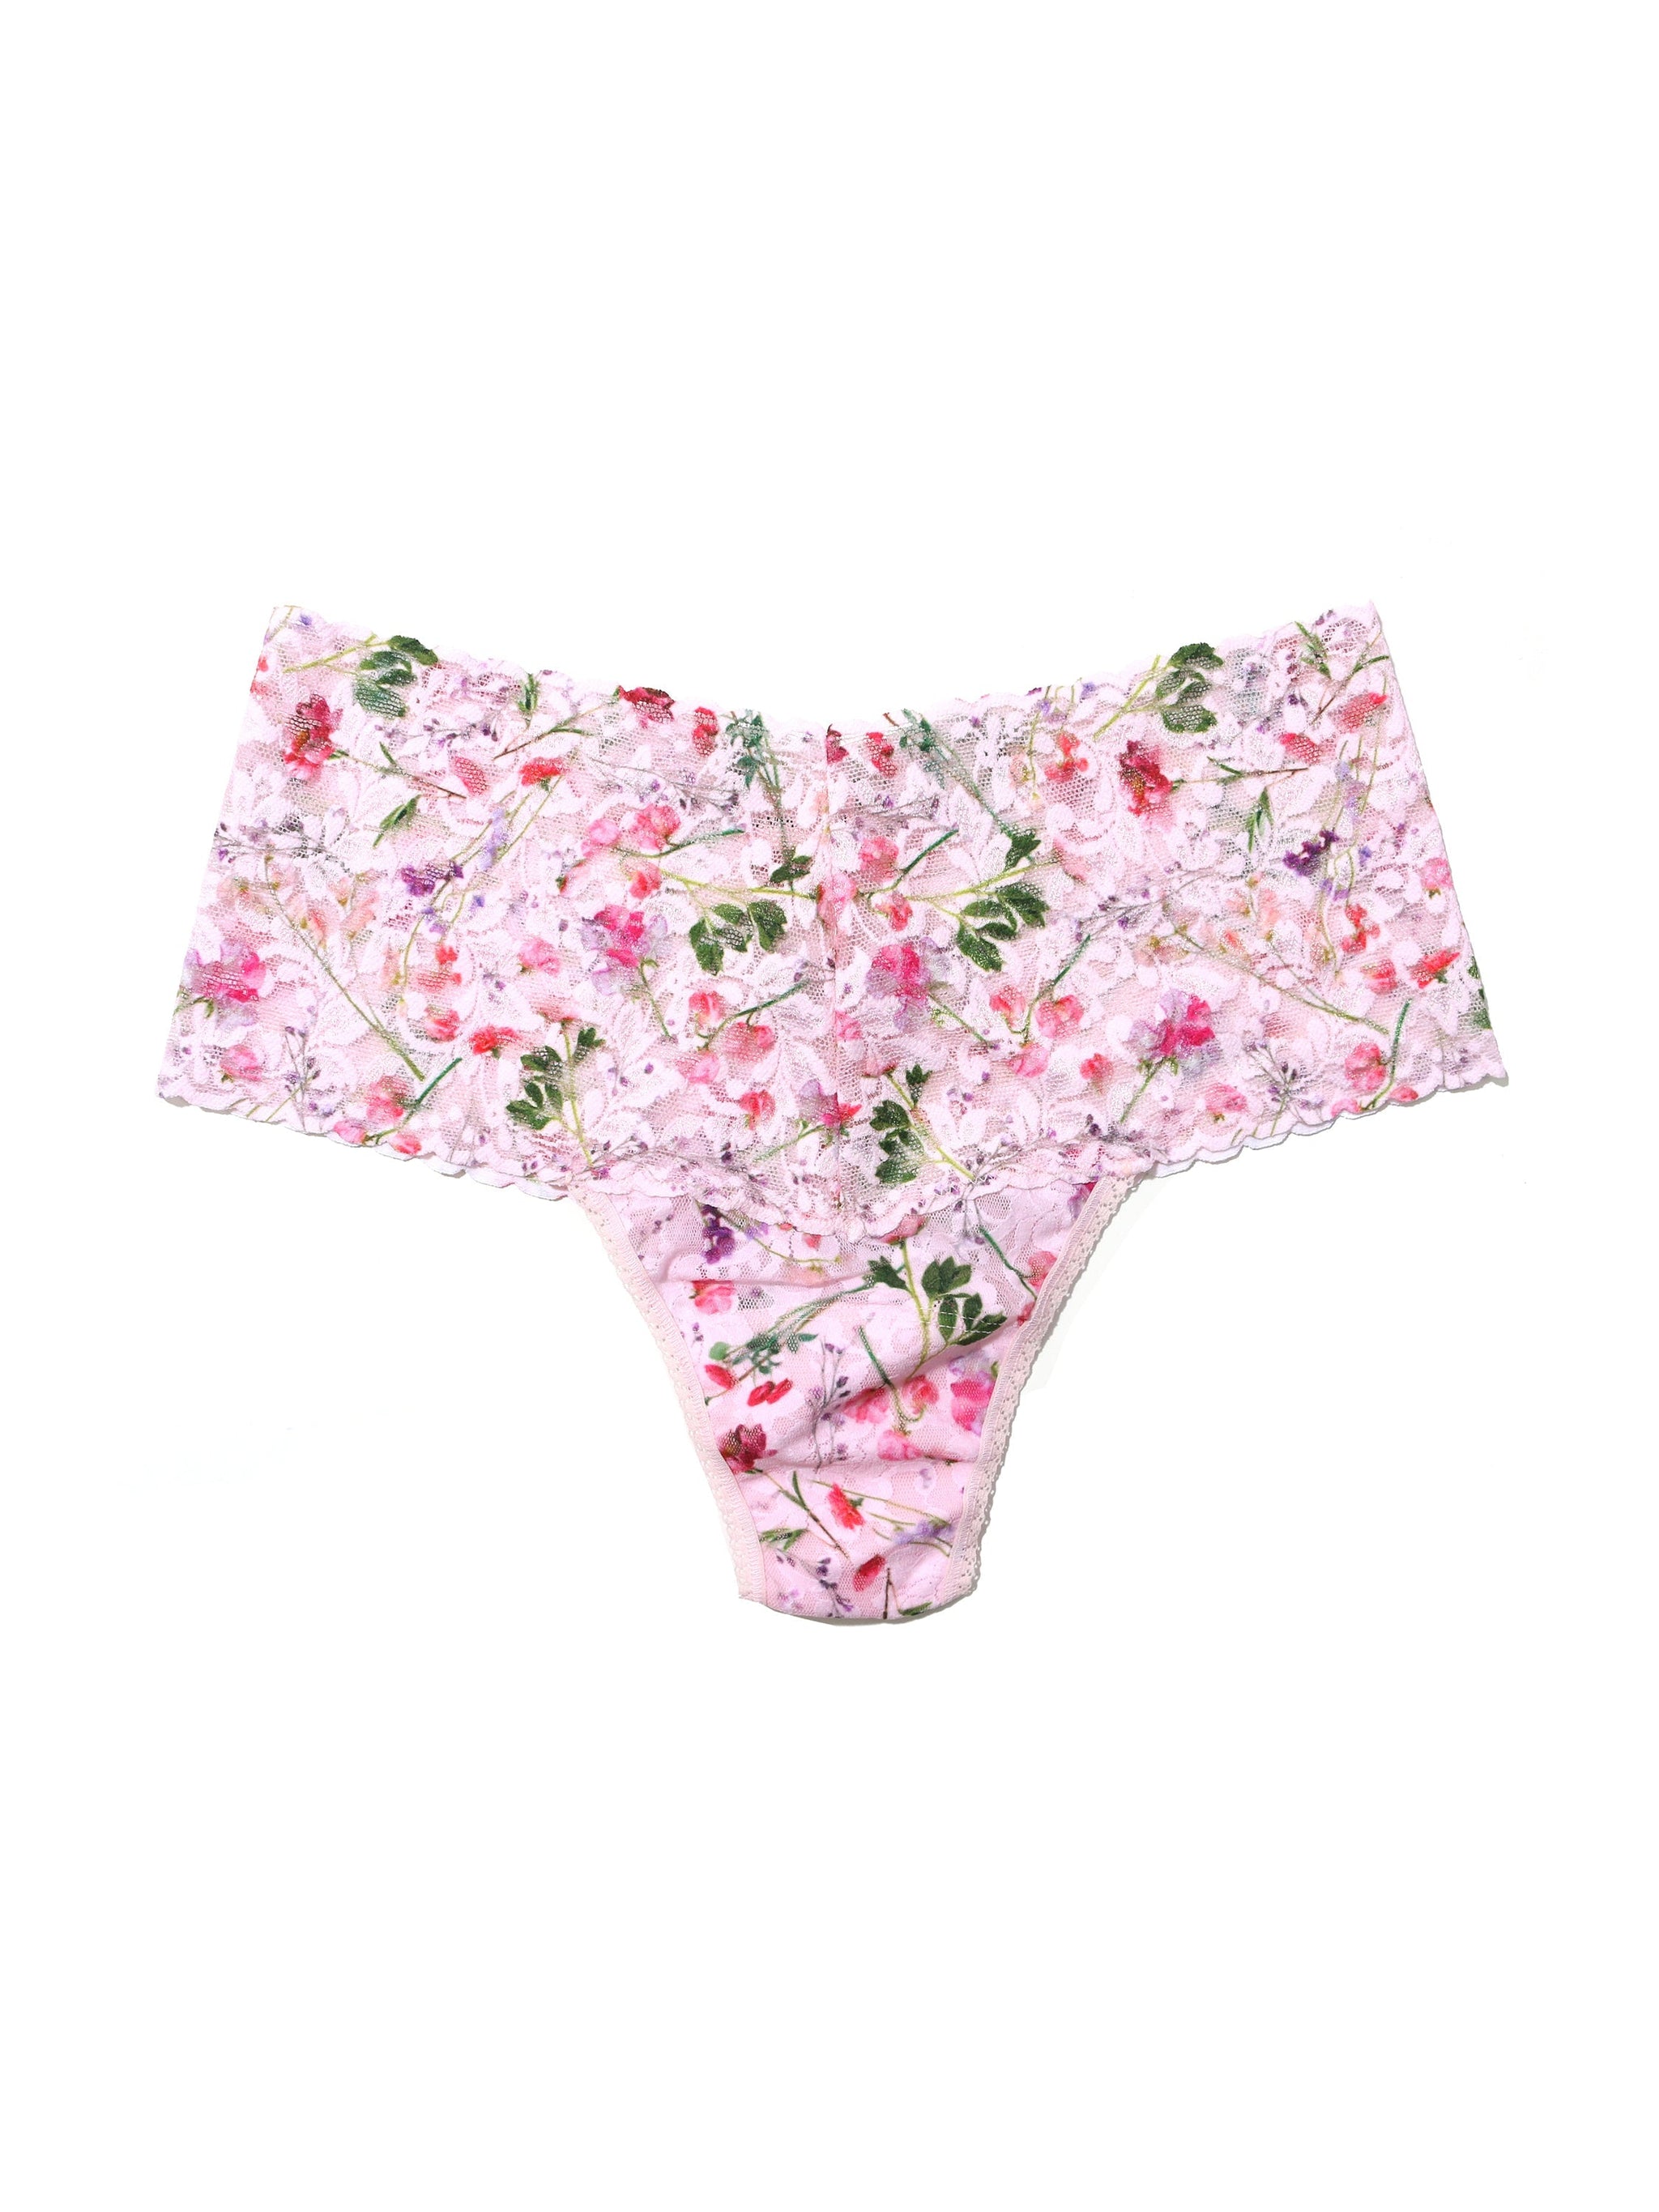 Plus Size Printed Retro Lace Thong Rise And Vines Sale